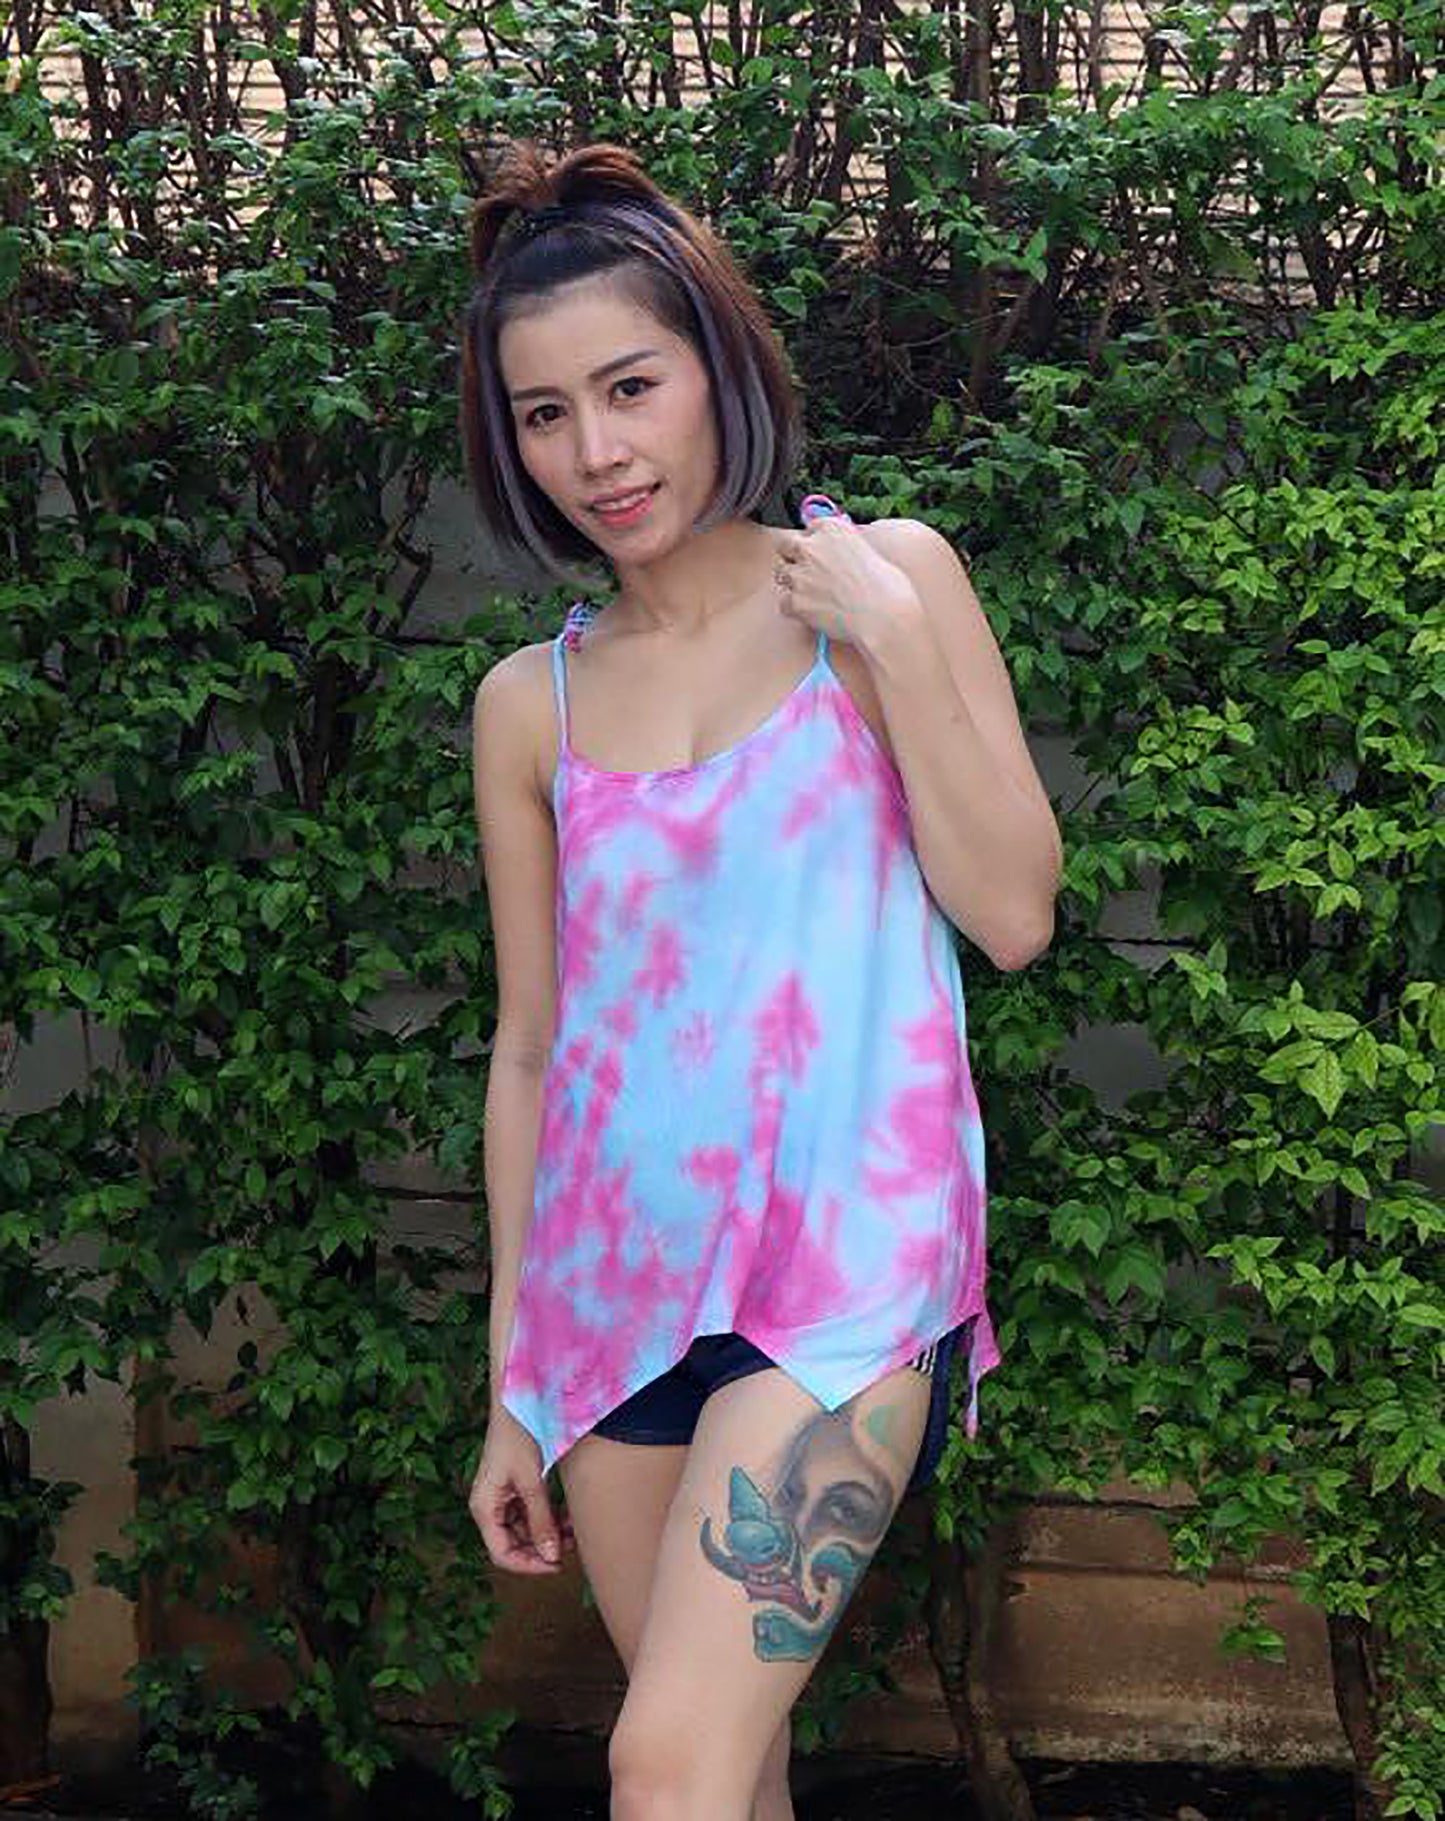 Cami Camisole Teen & Women, One Size Free Size Fit 0 to 8, Handmade Tie Dyed - Pink Blue Marble